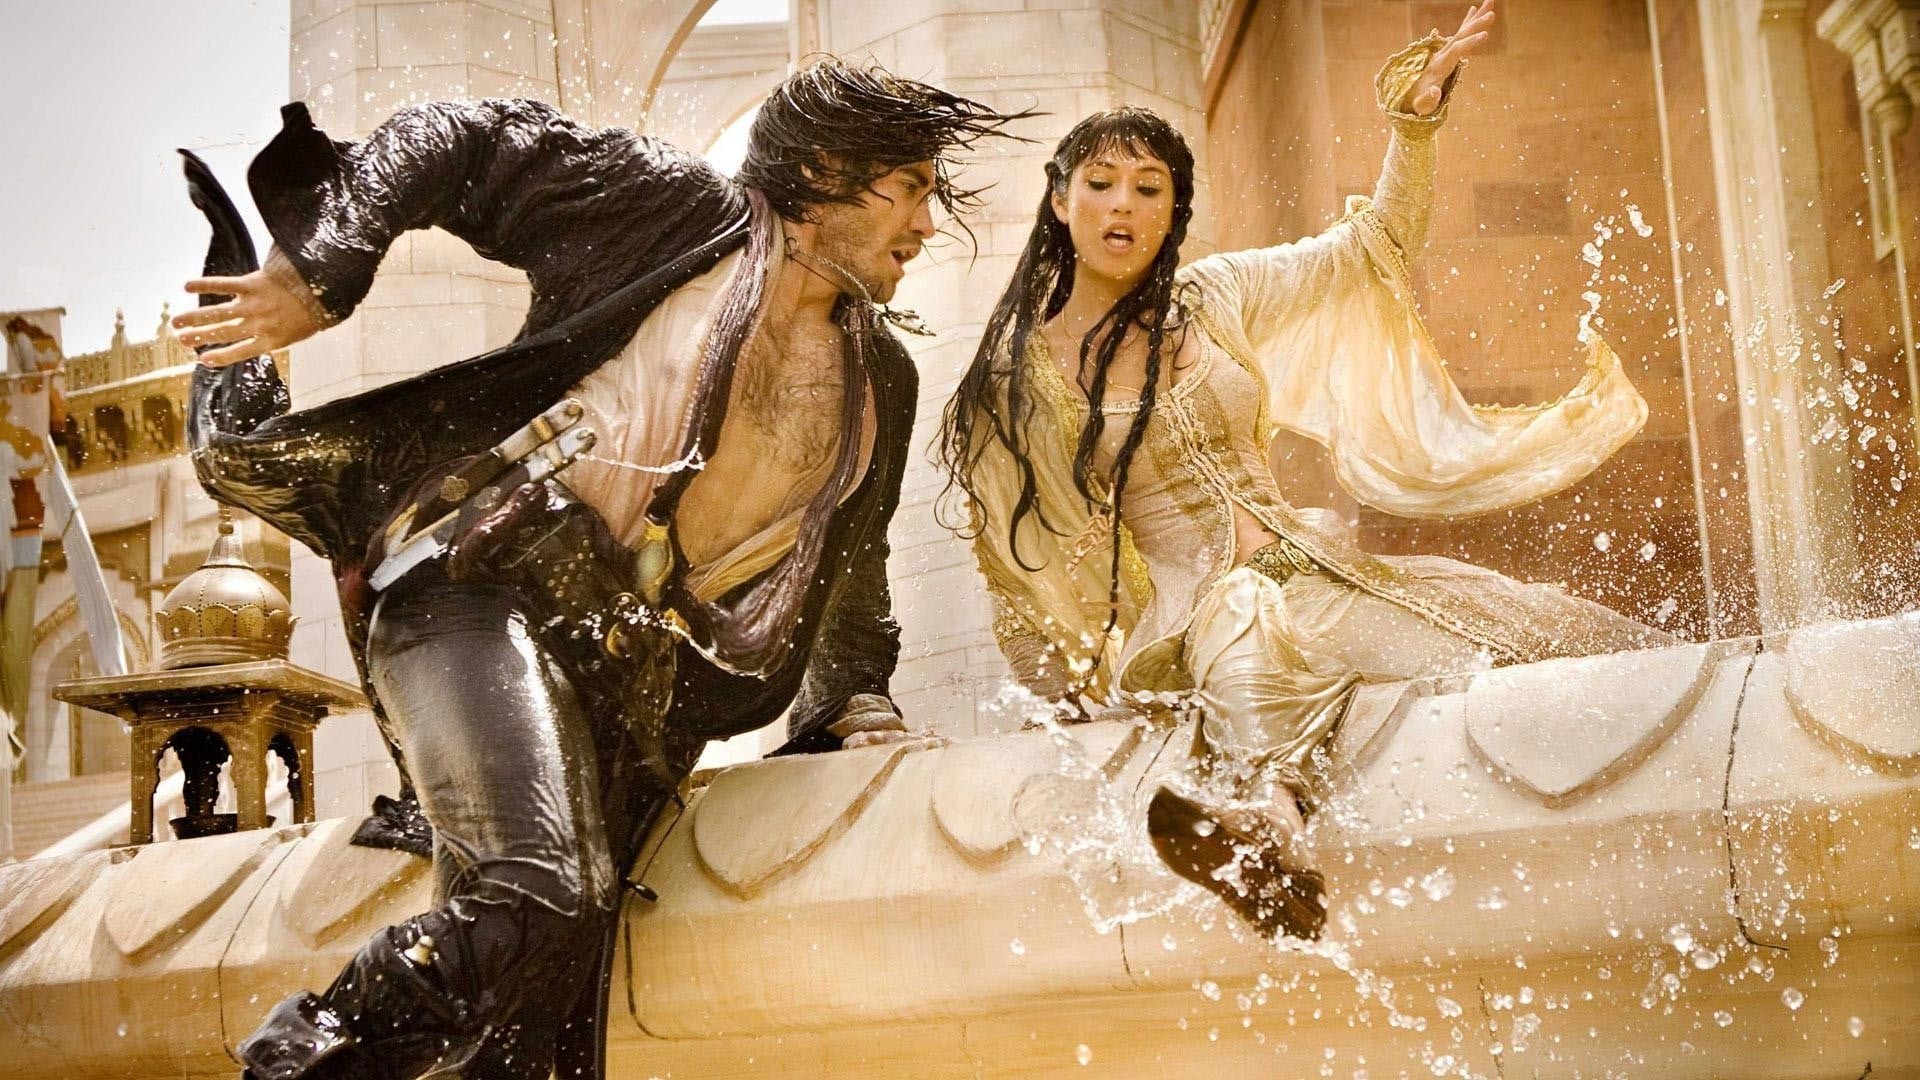 Prince of Persia: The Sands of Time Screenshot